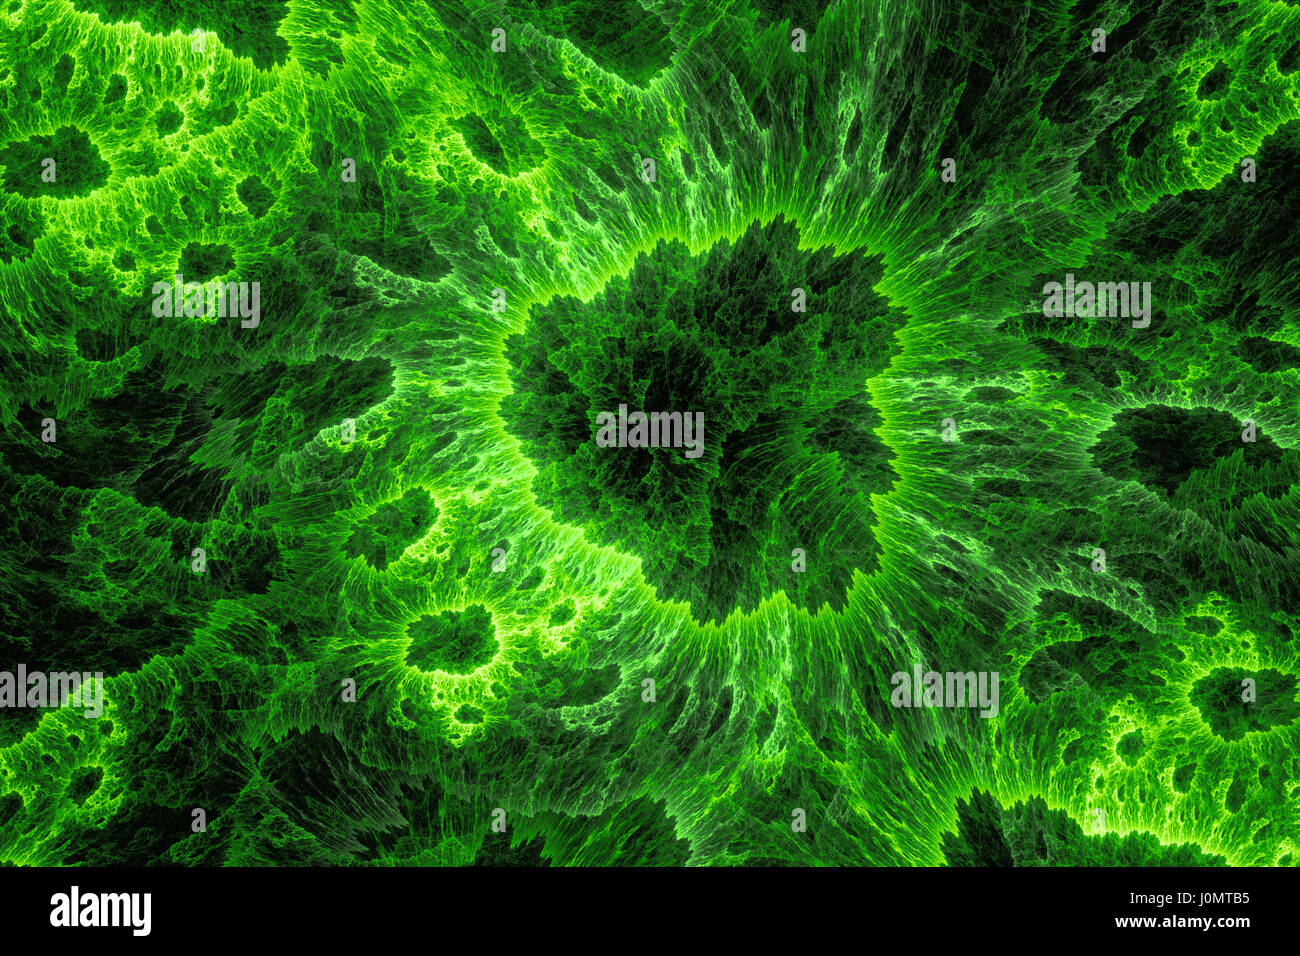 Green glowing microscopic world, computer generated abstract background, 3D rendering Stock Photo